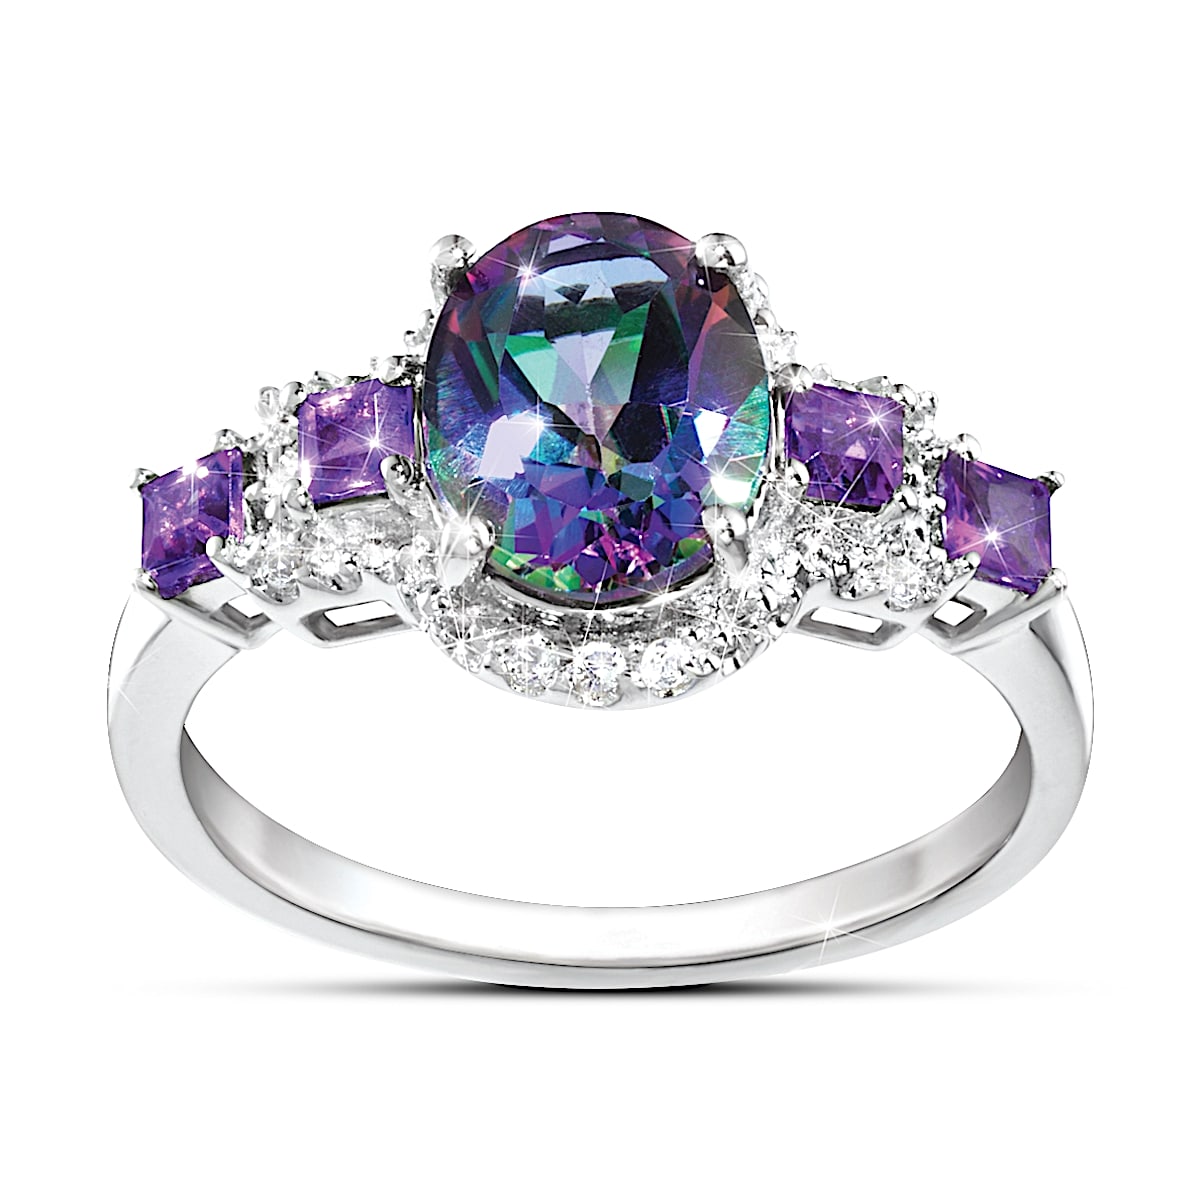 Sterling Silver Mystic Topaz CZ & Ethnic Oxidised Ring - R105650 | Şile  Silver, Jewelry Manufacturer & Wholesaler